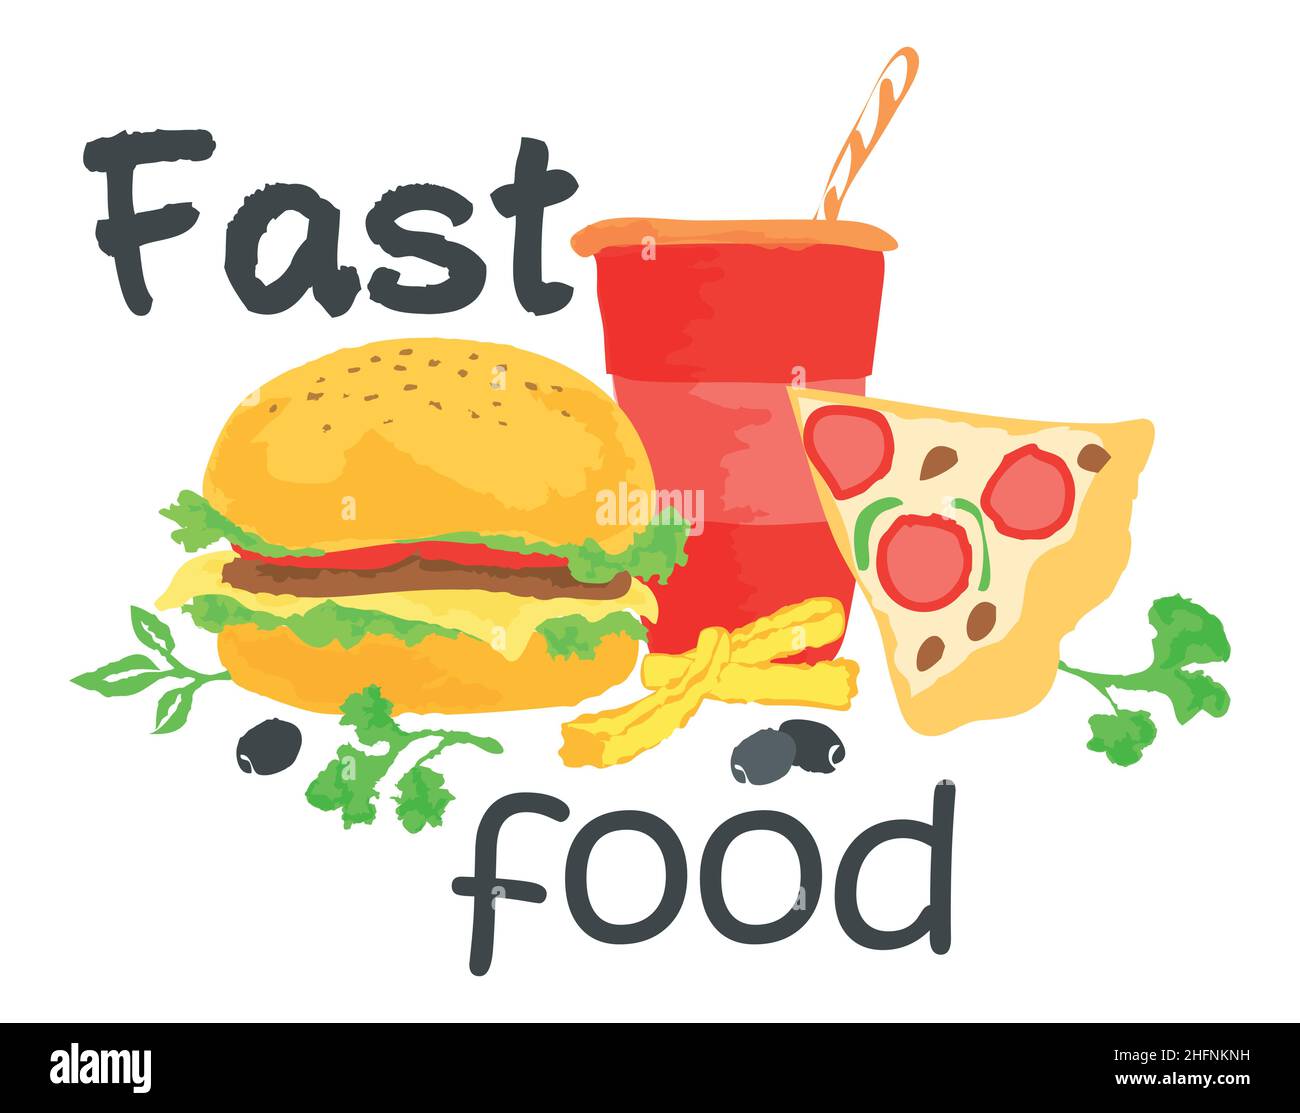 Fast Food sticker. Vector illustration in watercolor style, for graphic and web design Stock Vector